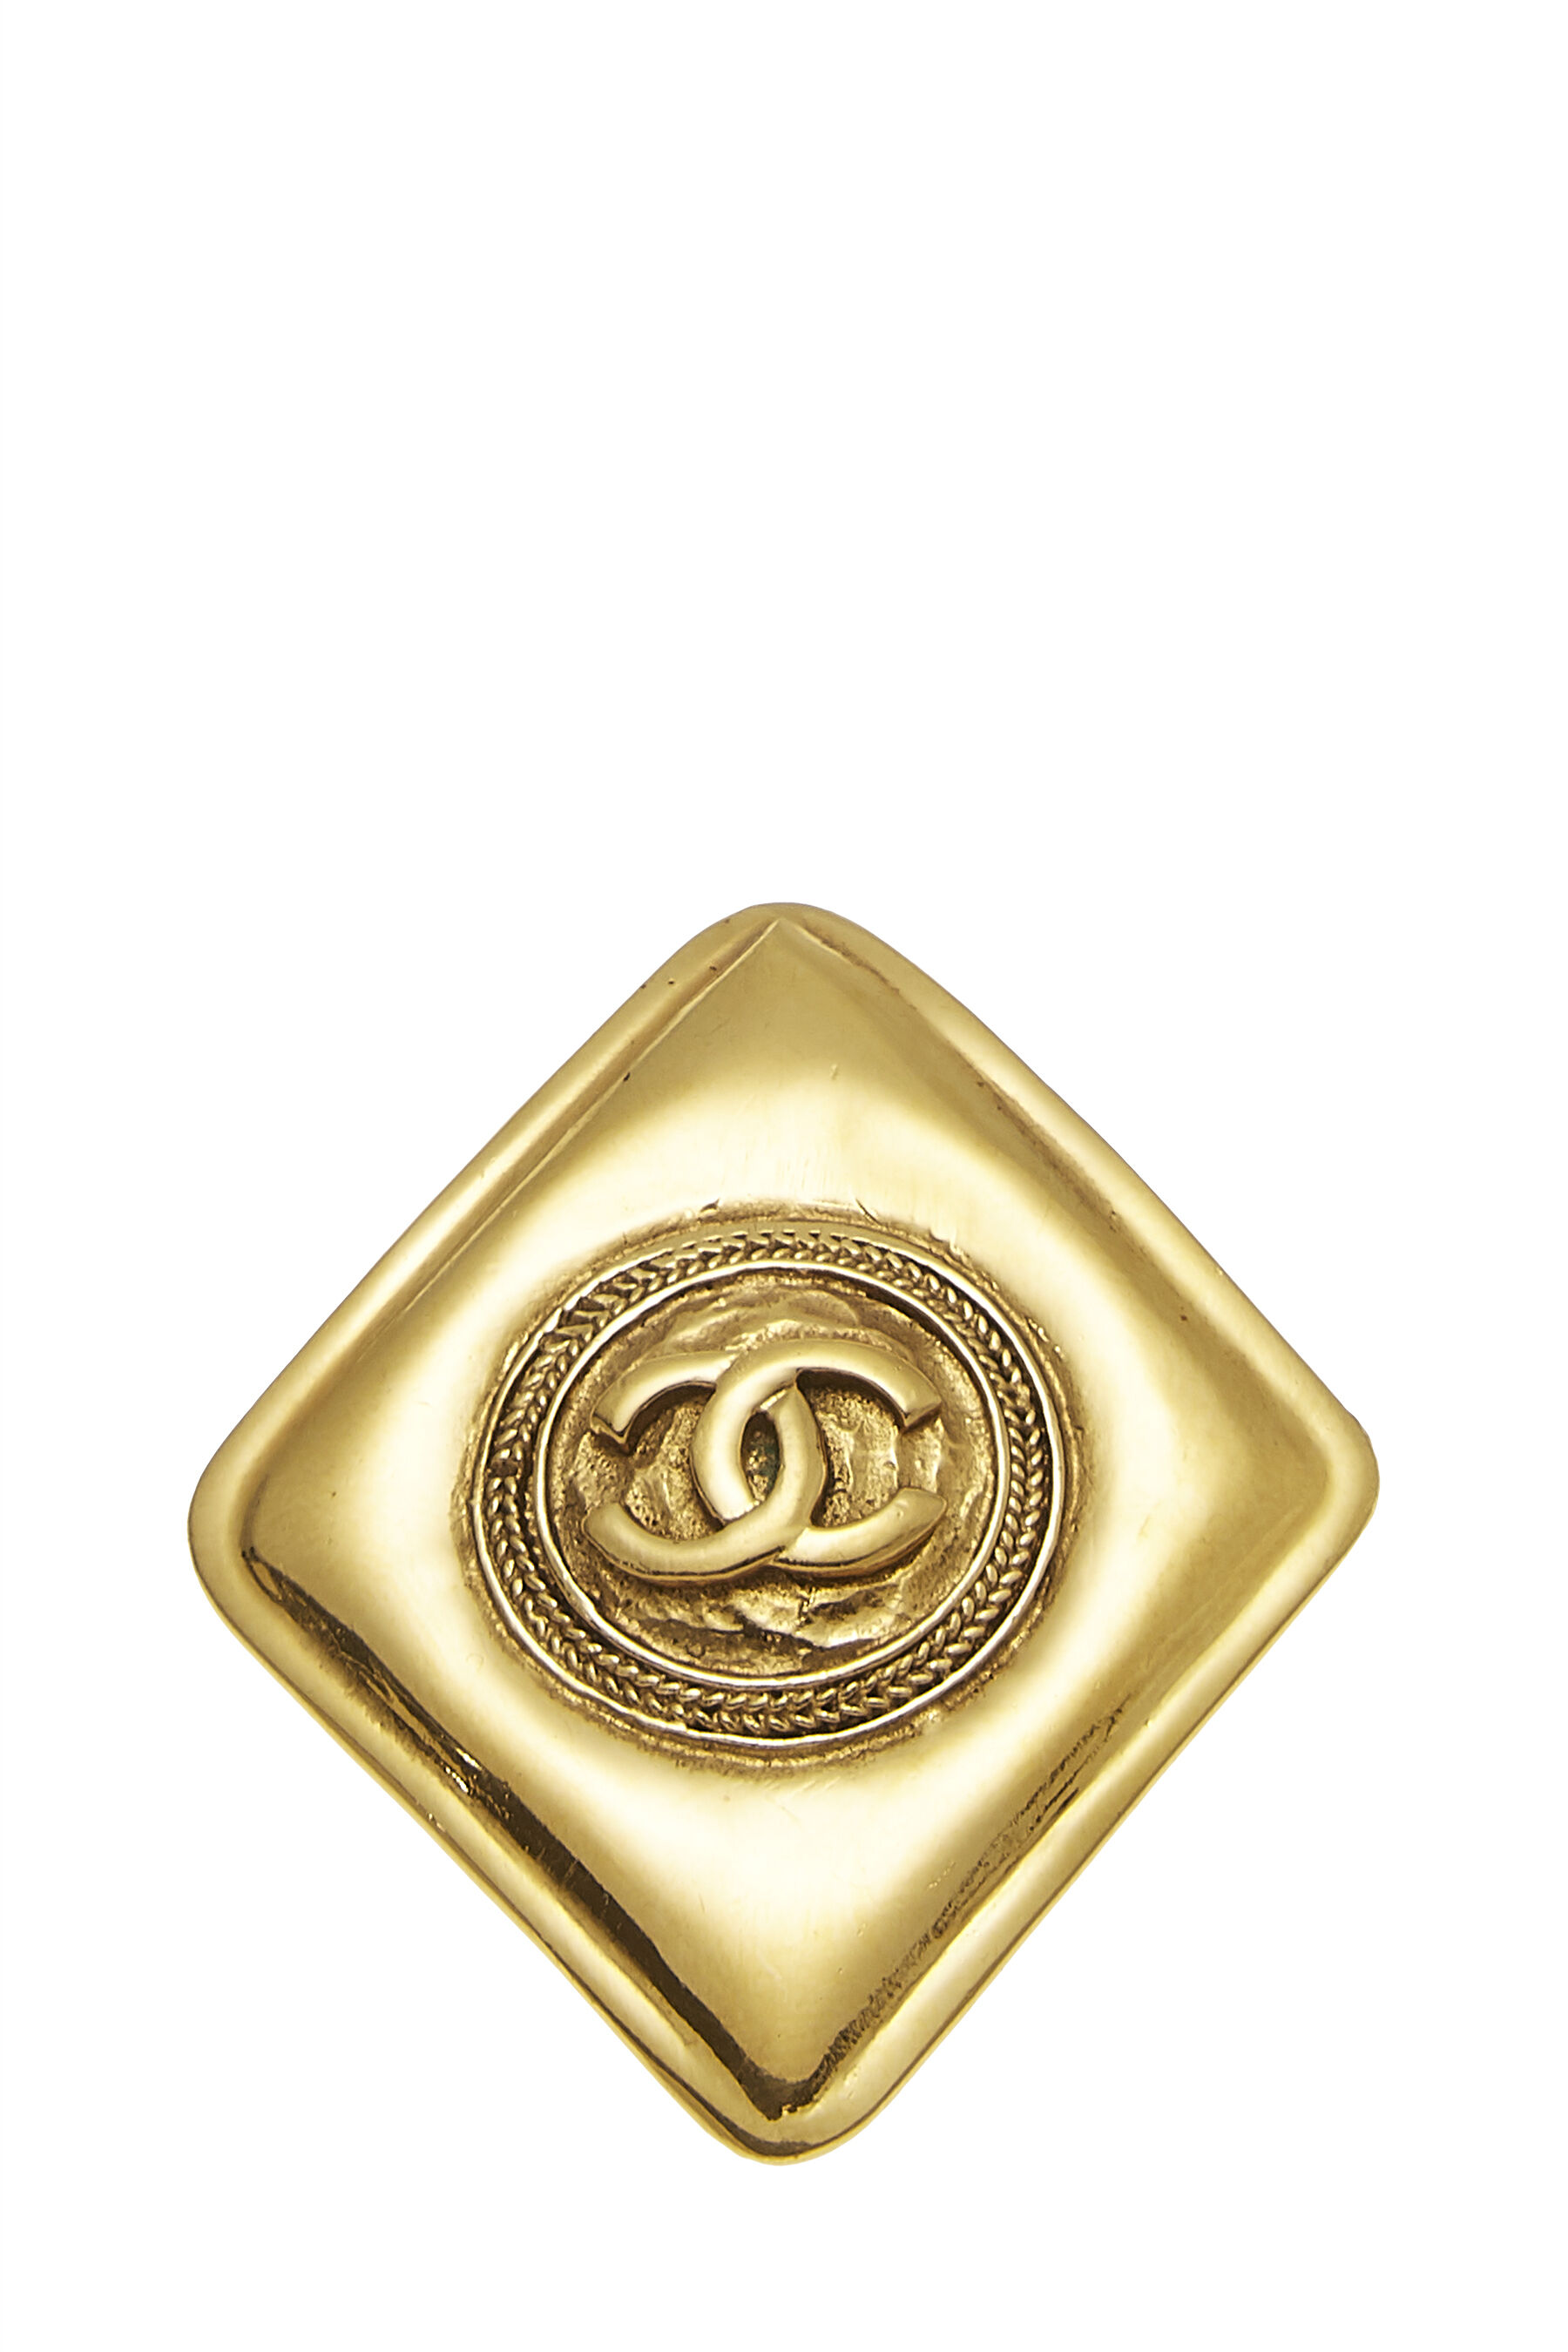 STL file Overlapping Chanel logo diamond pendant 3D print modelTemplate to  download and 3D printCults